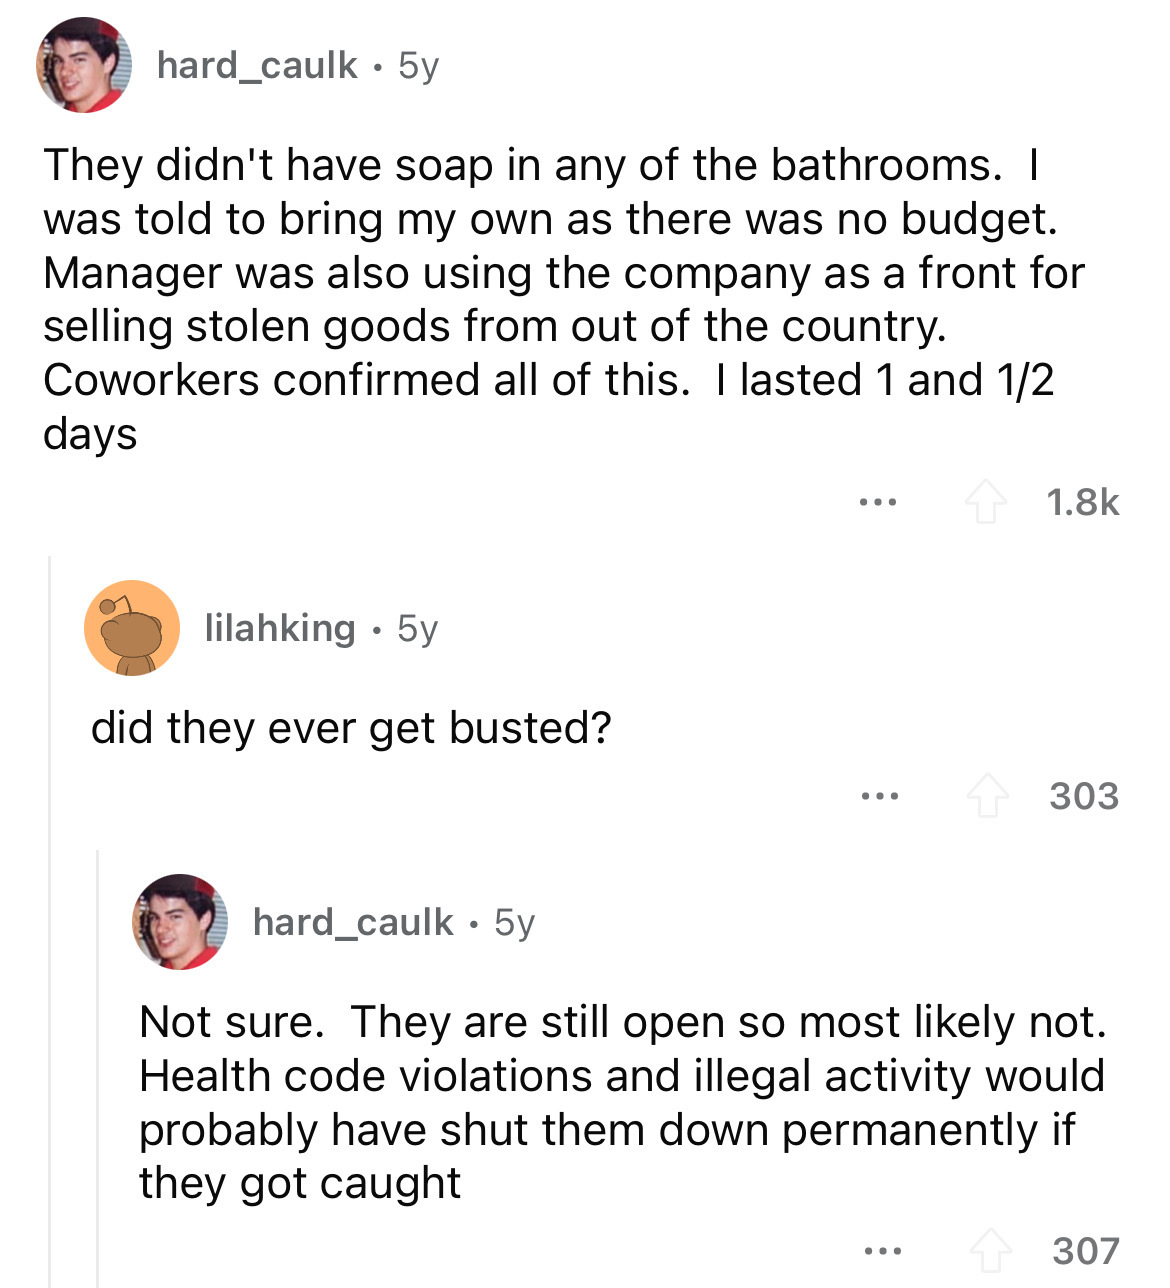 number - hard_caulk 5y They didn't have soap in any of the bathrooms. I was told to bring my own as there was no budget. Manager was also using the company as a front for selling stolen goods from out of the country. Coworkers confirmed all of this. I las